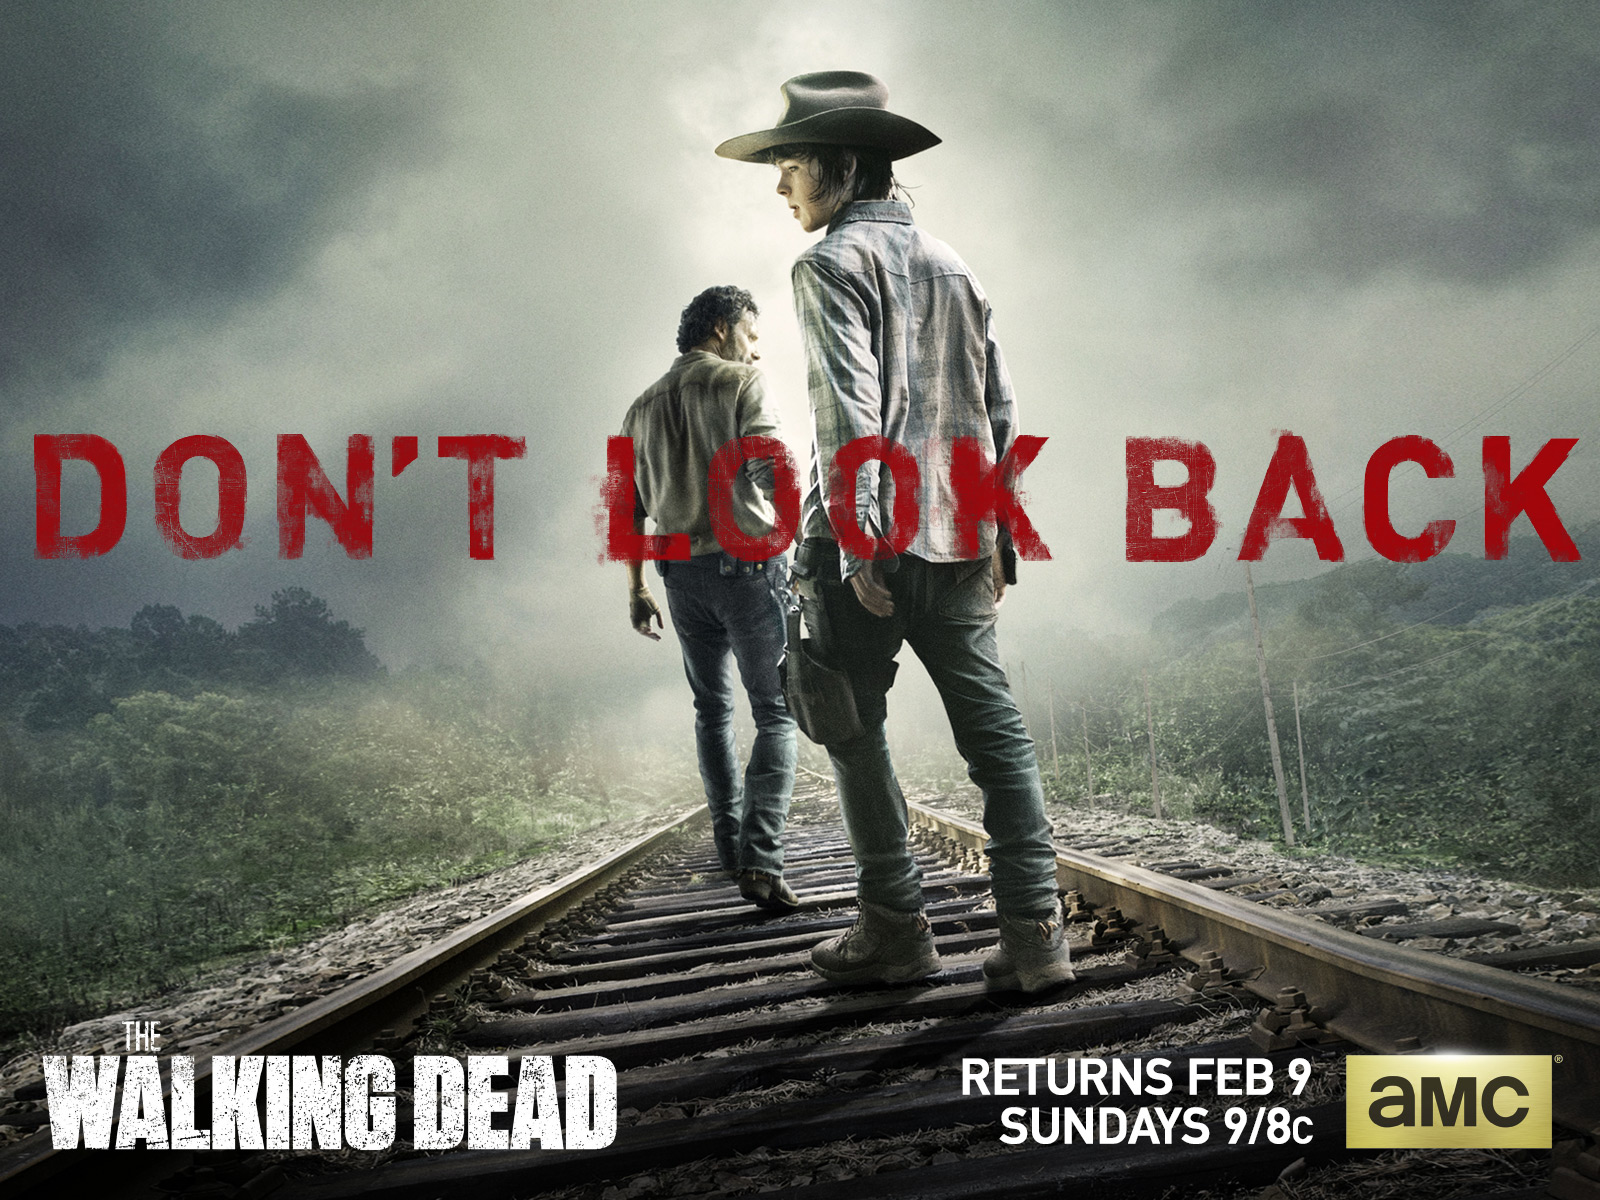  Walking Dead Season 4 wallpaper with Carl and Rick Movie Wallpapers